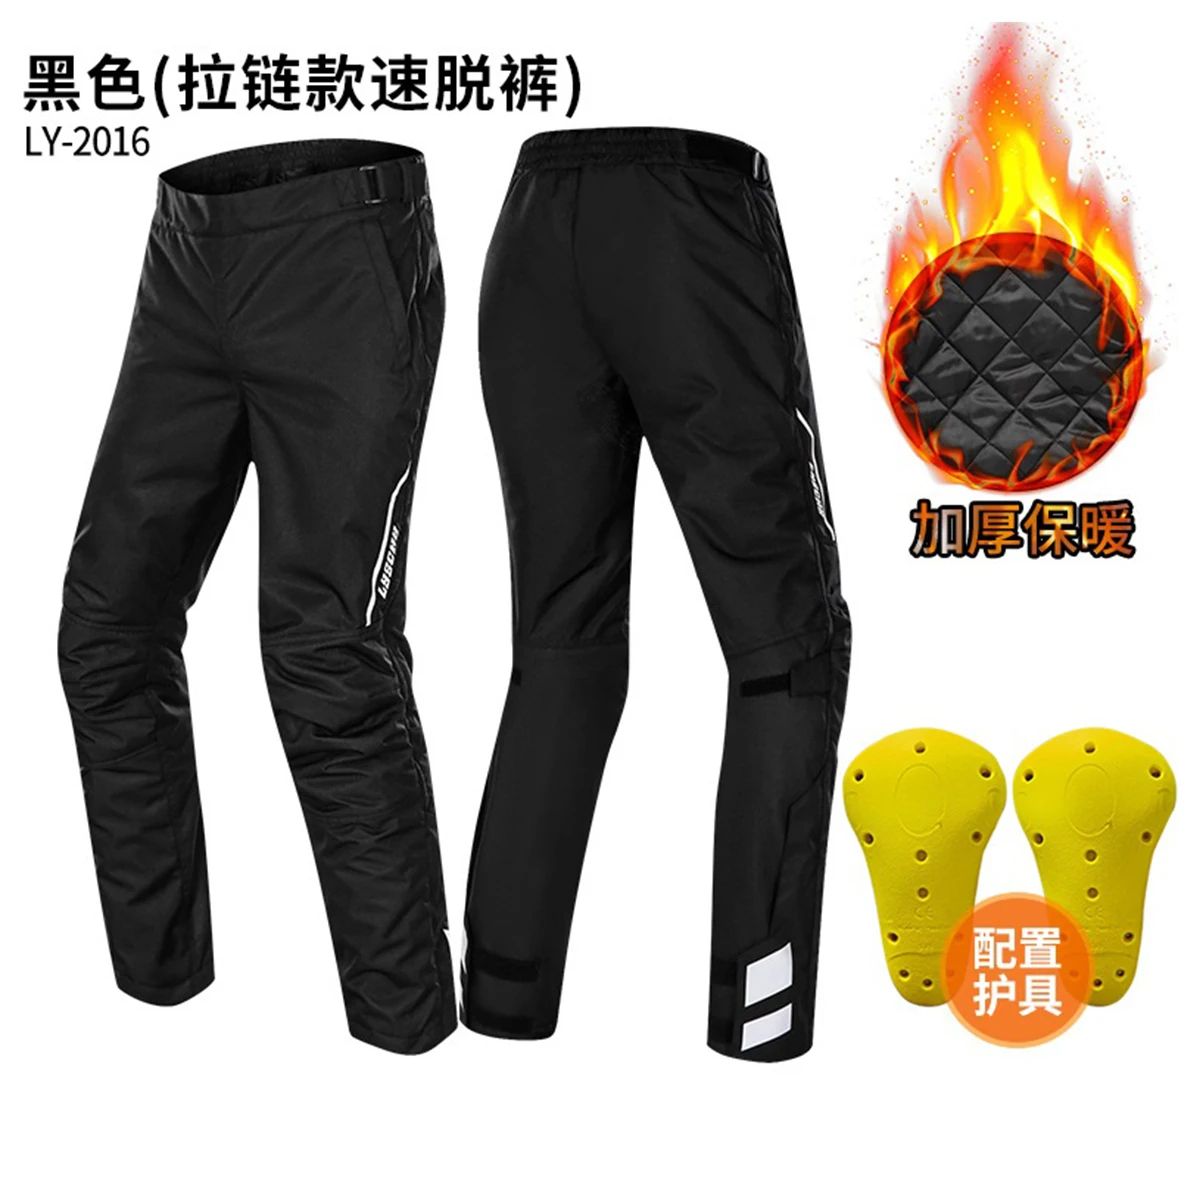 Lyschy Winter Warm Trousers Men Motorcycle Riding Pants Waterproof Protective Pantalon Motorbike Quick-Release Windproof Cycling